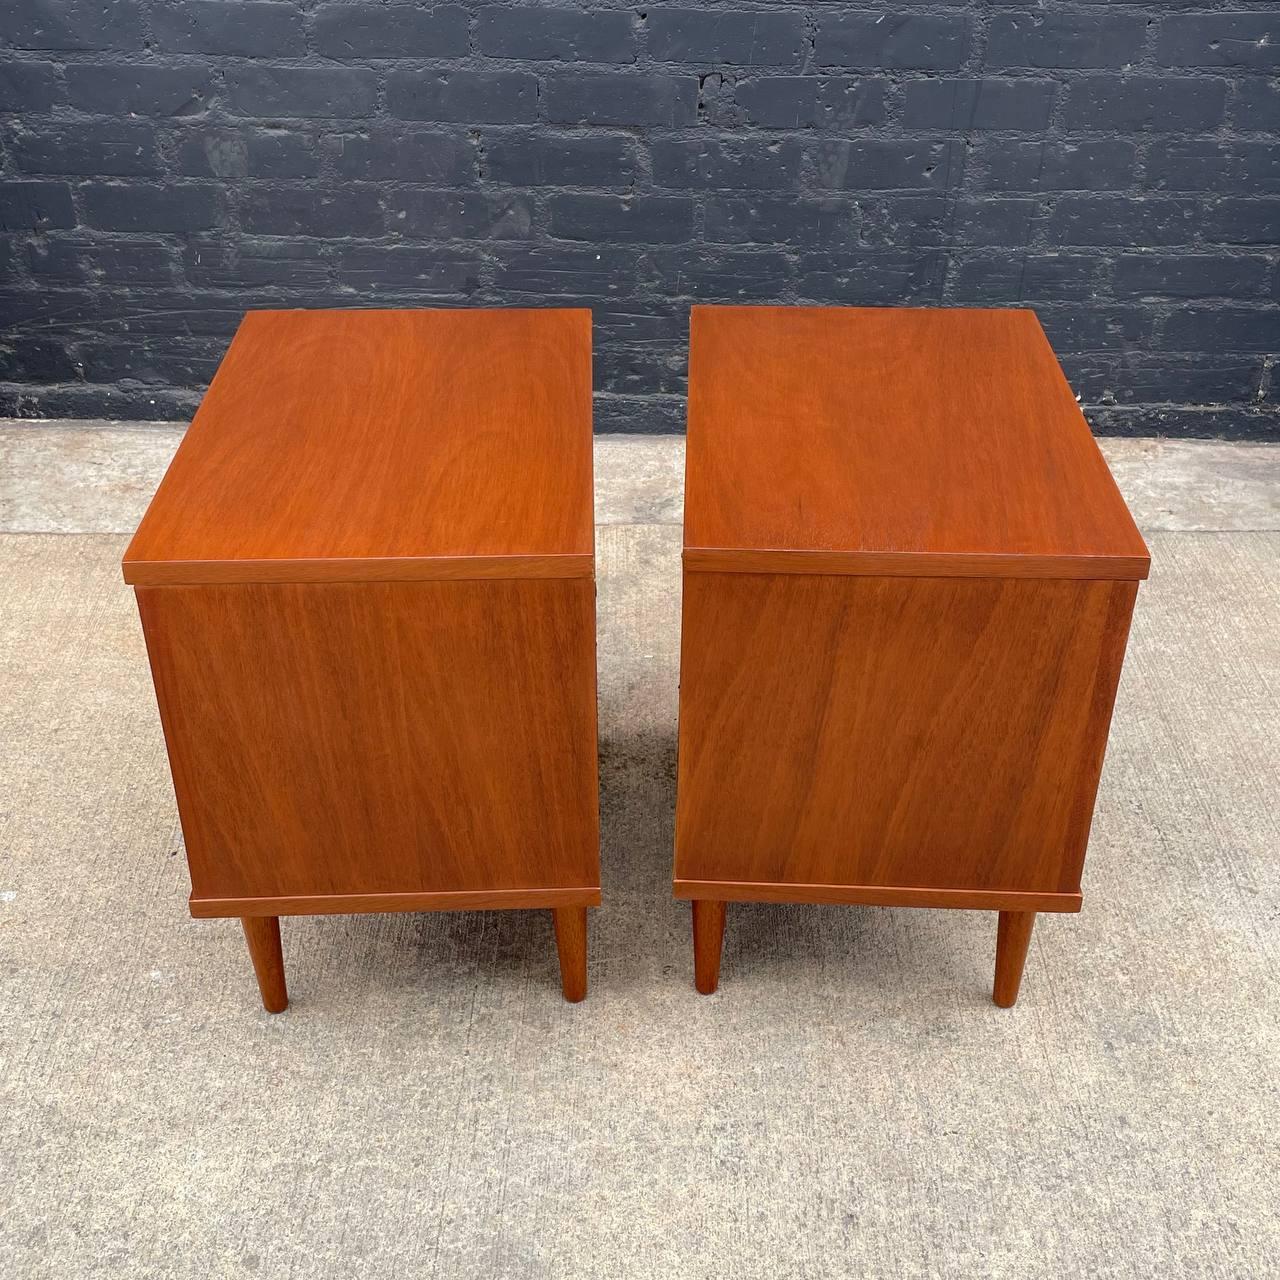 Newly Refinished - Pair of Mid-Century Modern Walnut Night Stands by Basic-Witz 1